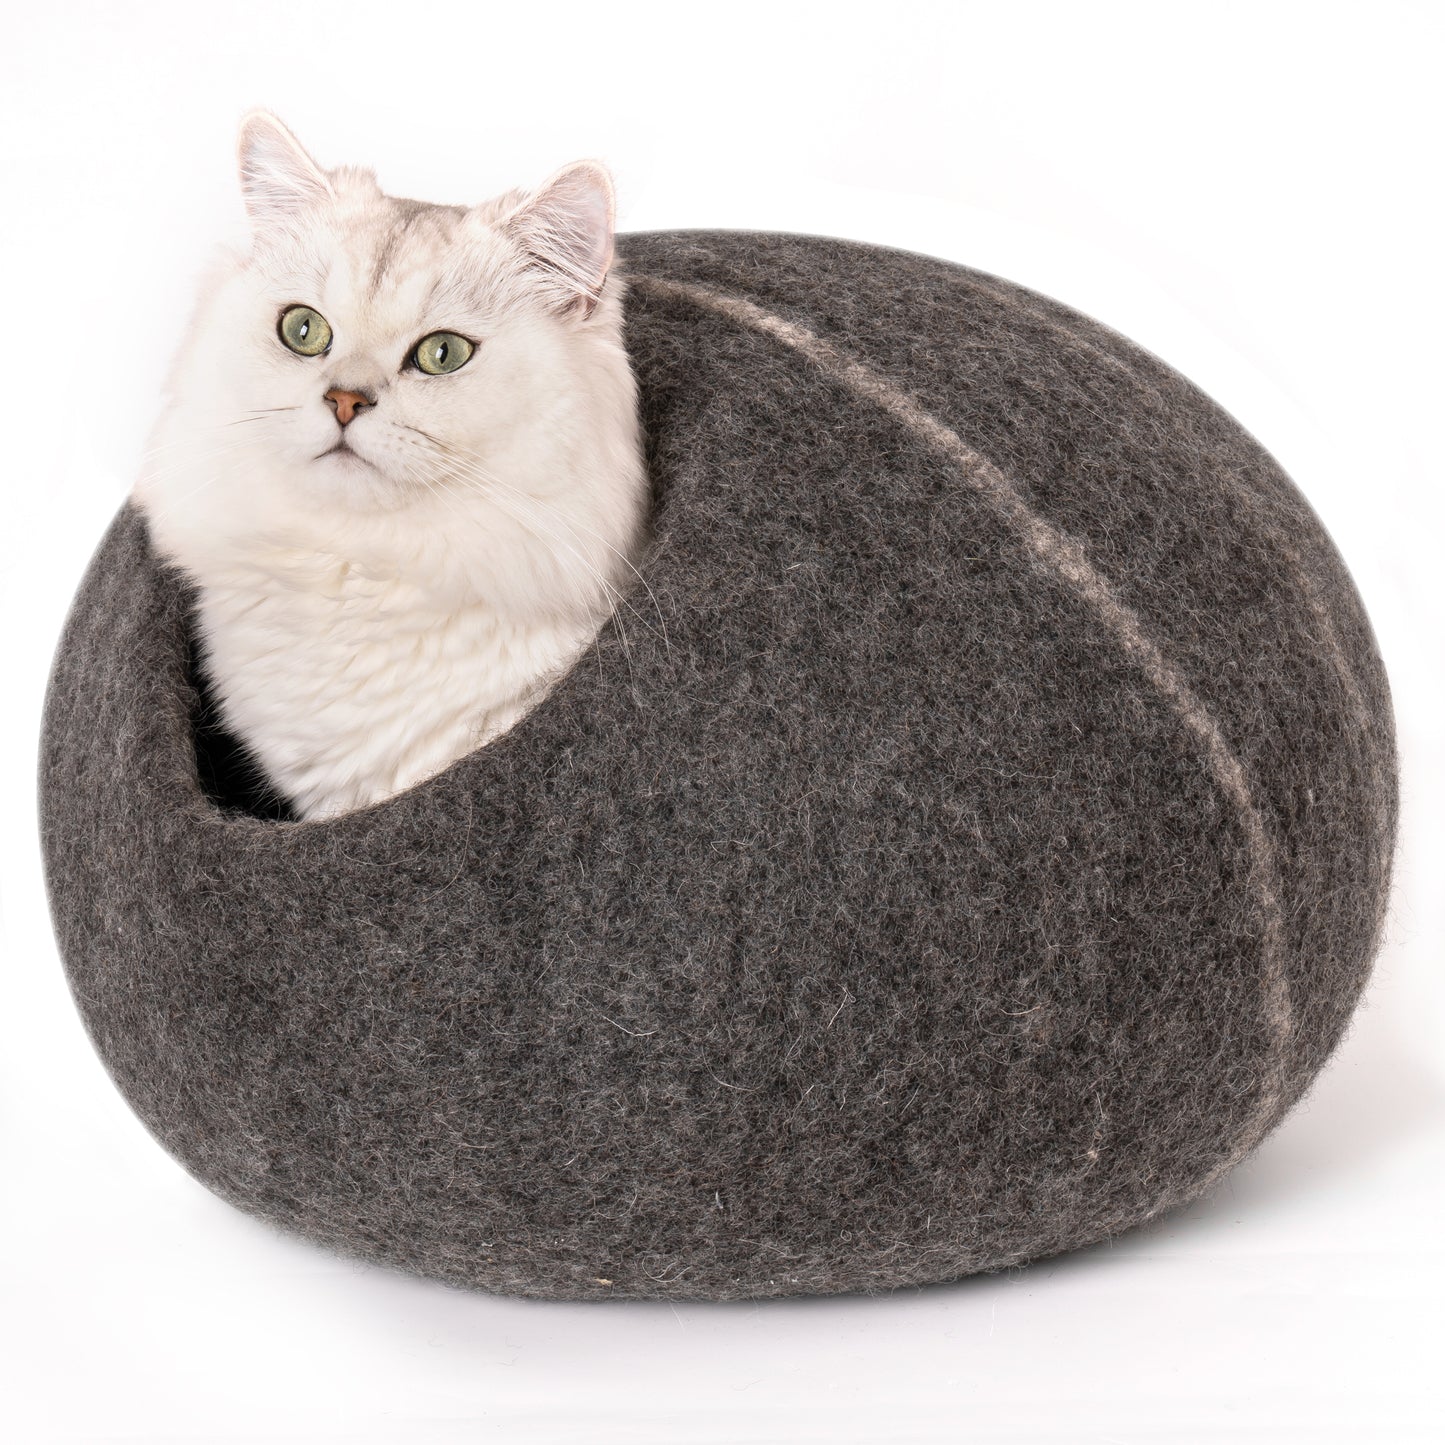 Cat Cave Bed -Handmade Wool Cat Bed Cave with Mouse Toy